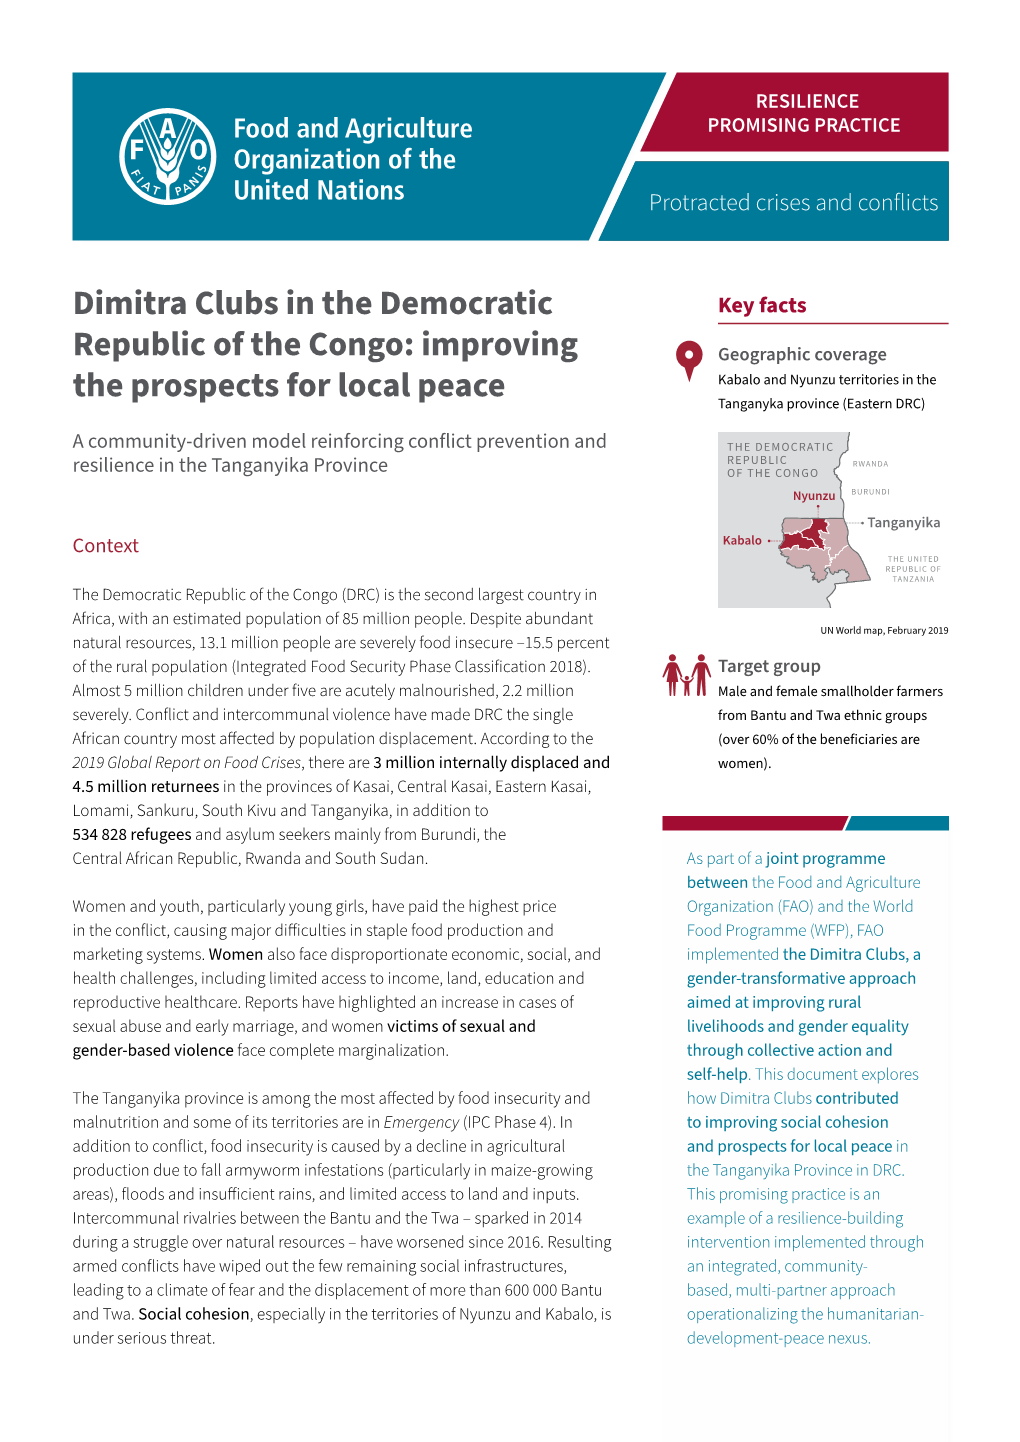 Dimitra Clubs in the Democratic Republic of the Congo: Improving